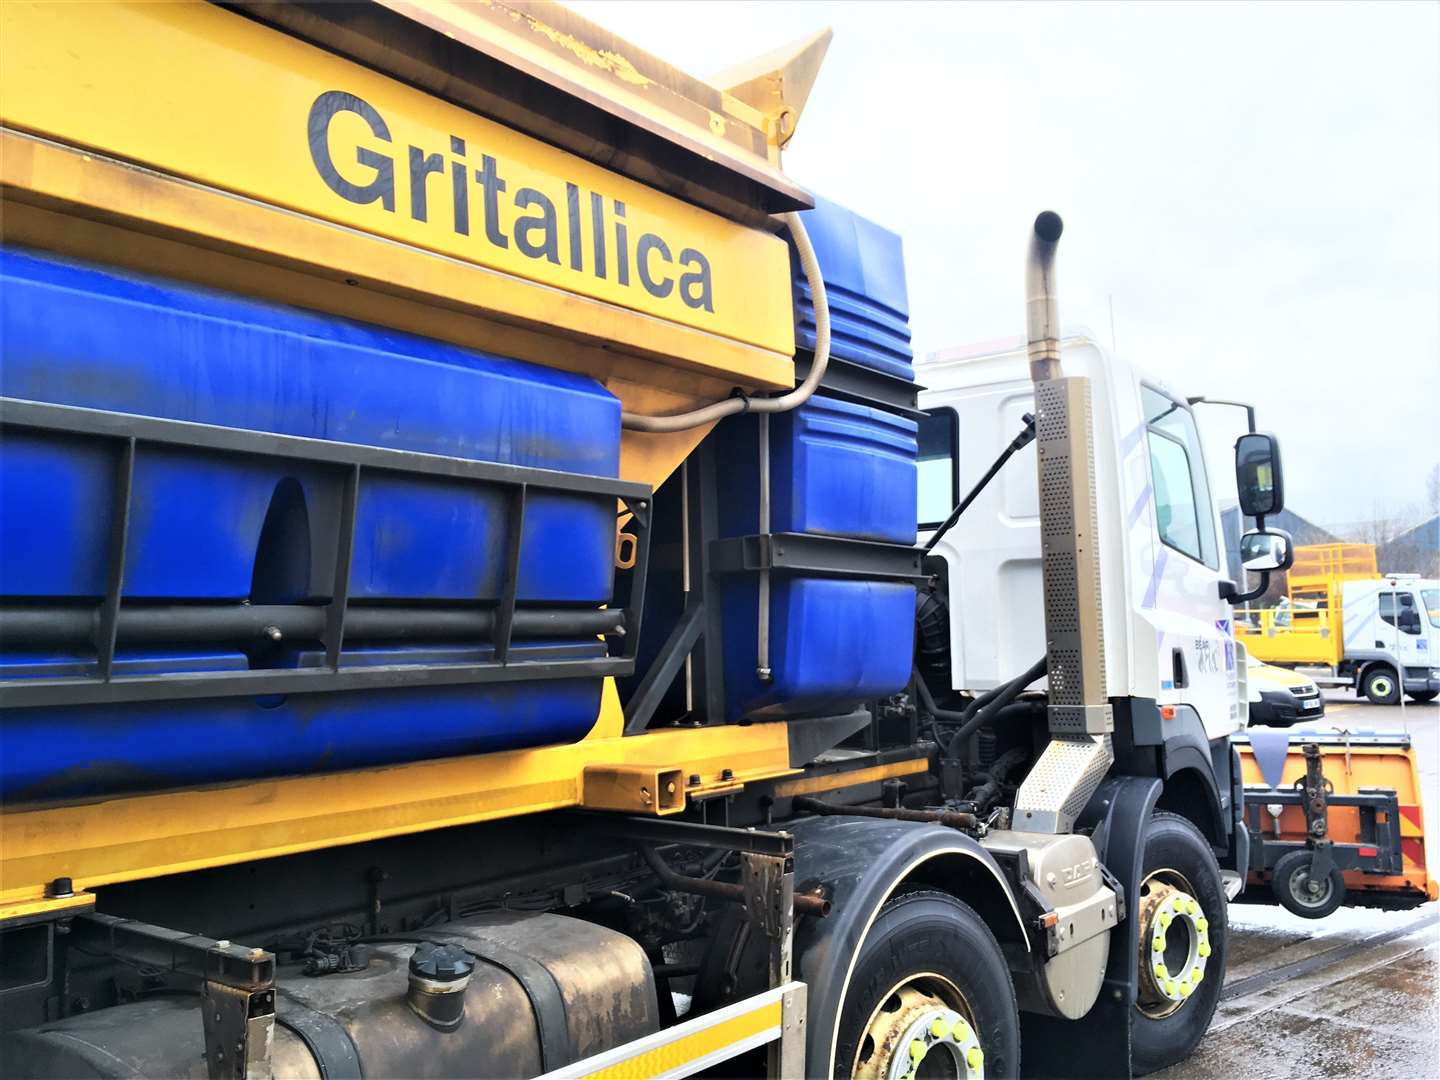 Gritallica is ready for tackling the wintry roads in Caithness.